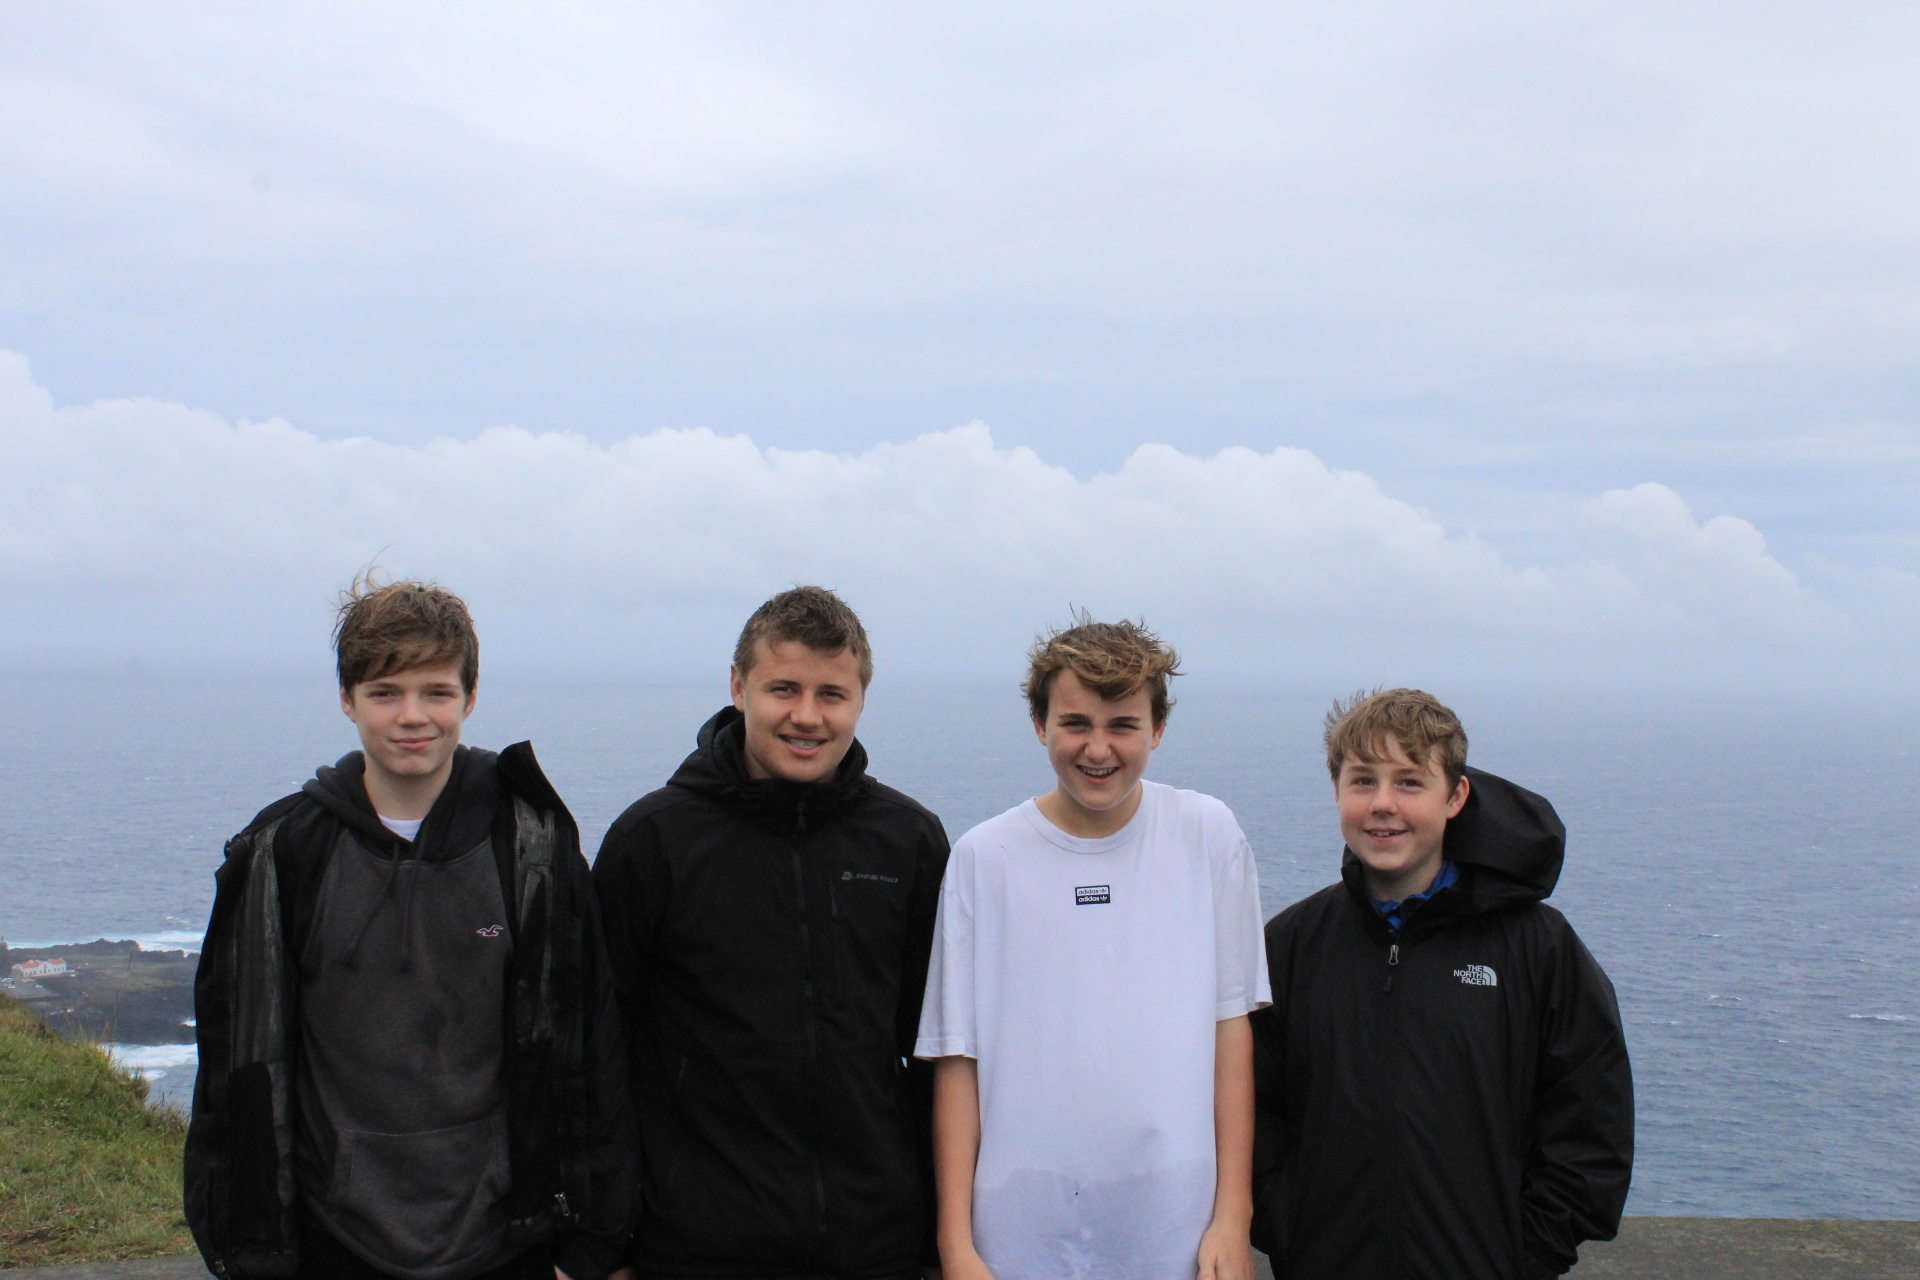 St Benedict's Geography Trip to the Azores Oct 22